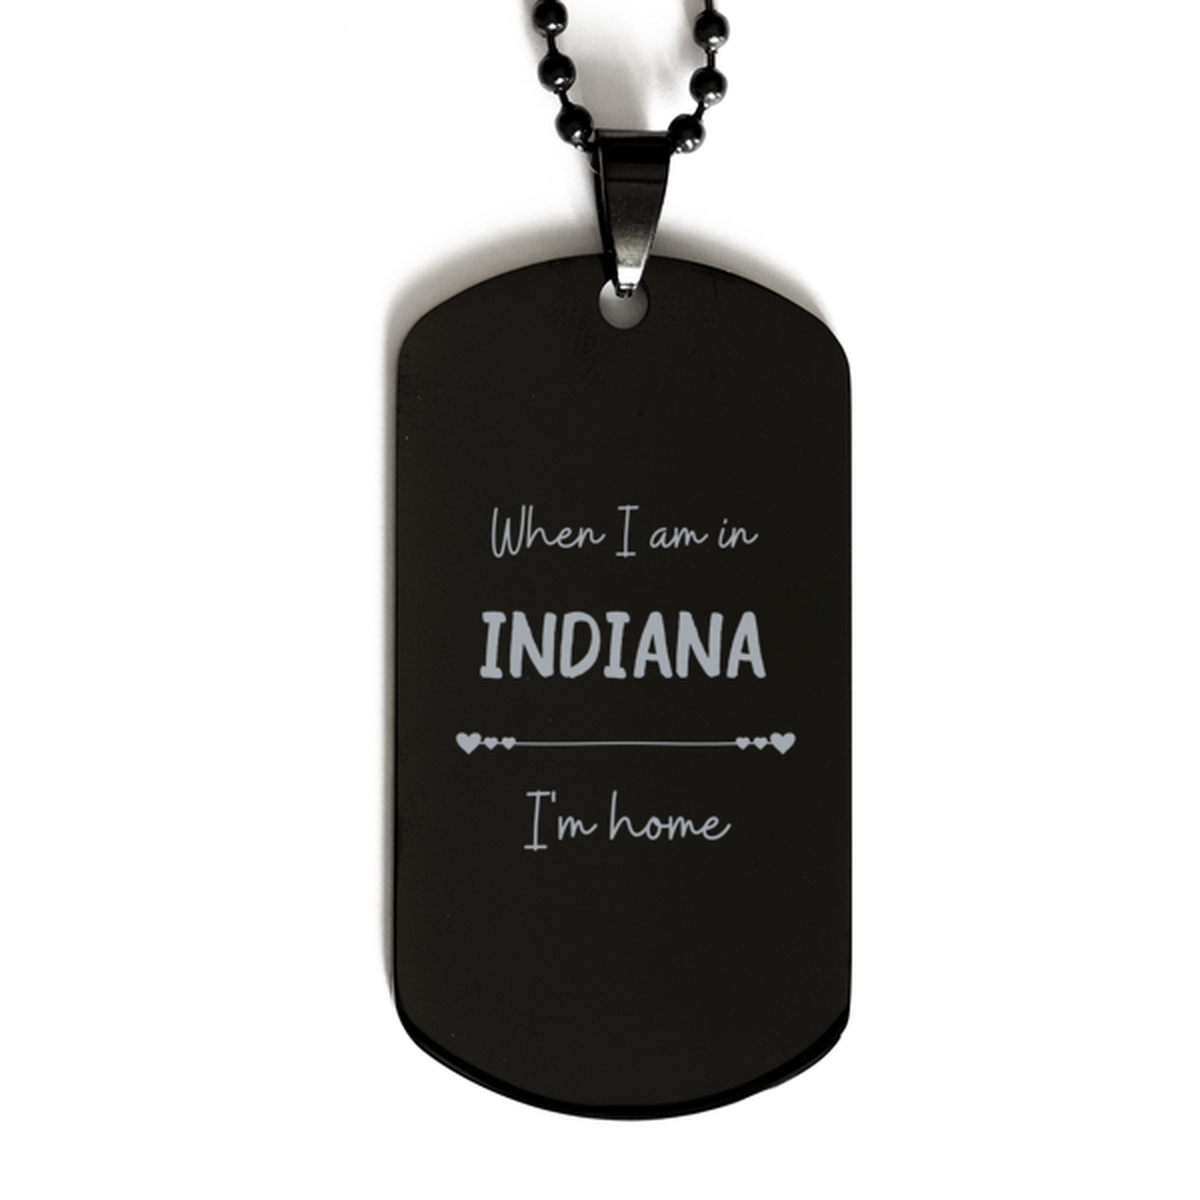 When I am in Indiana I'm home Black Dog Tag, Cheap Gifts For Indiana, State Indiana Birthday Gifts for Friends Coworker